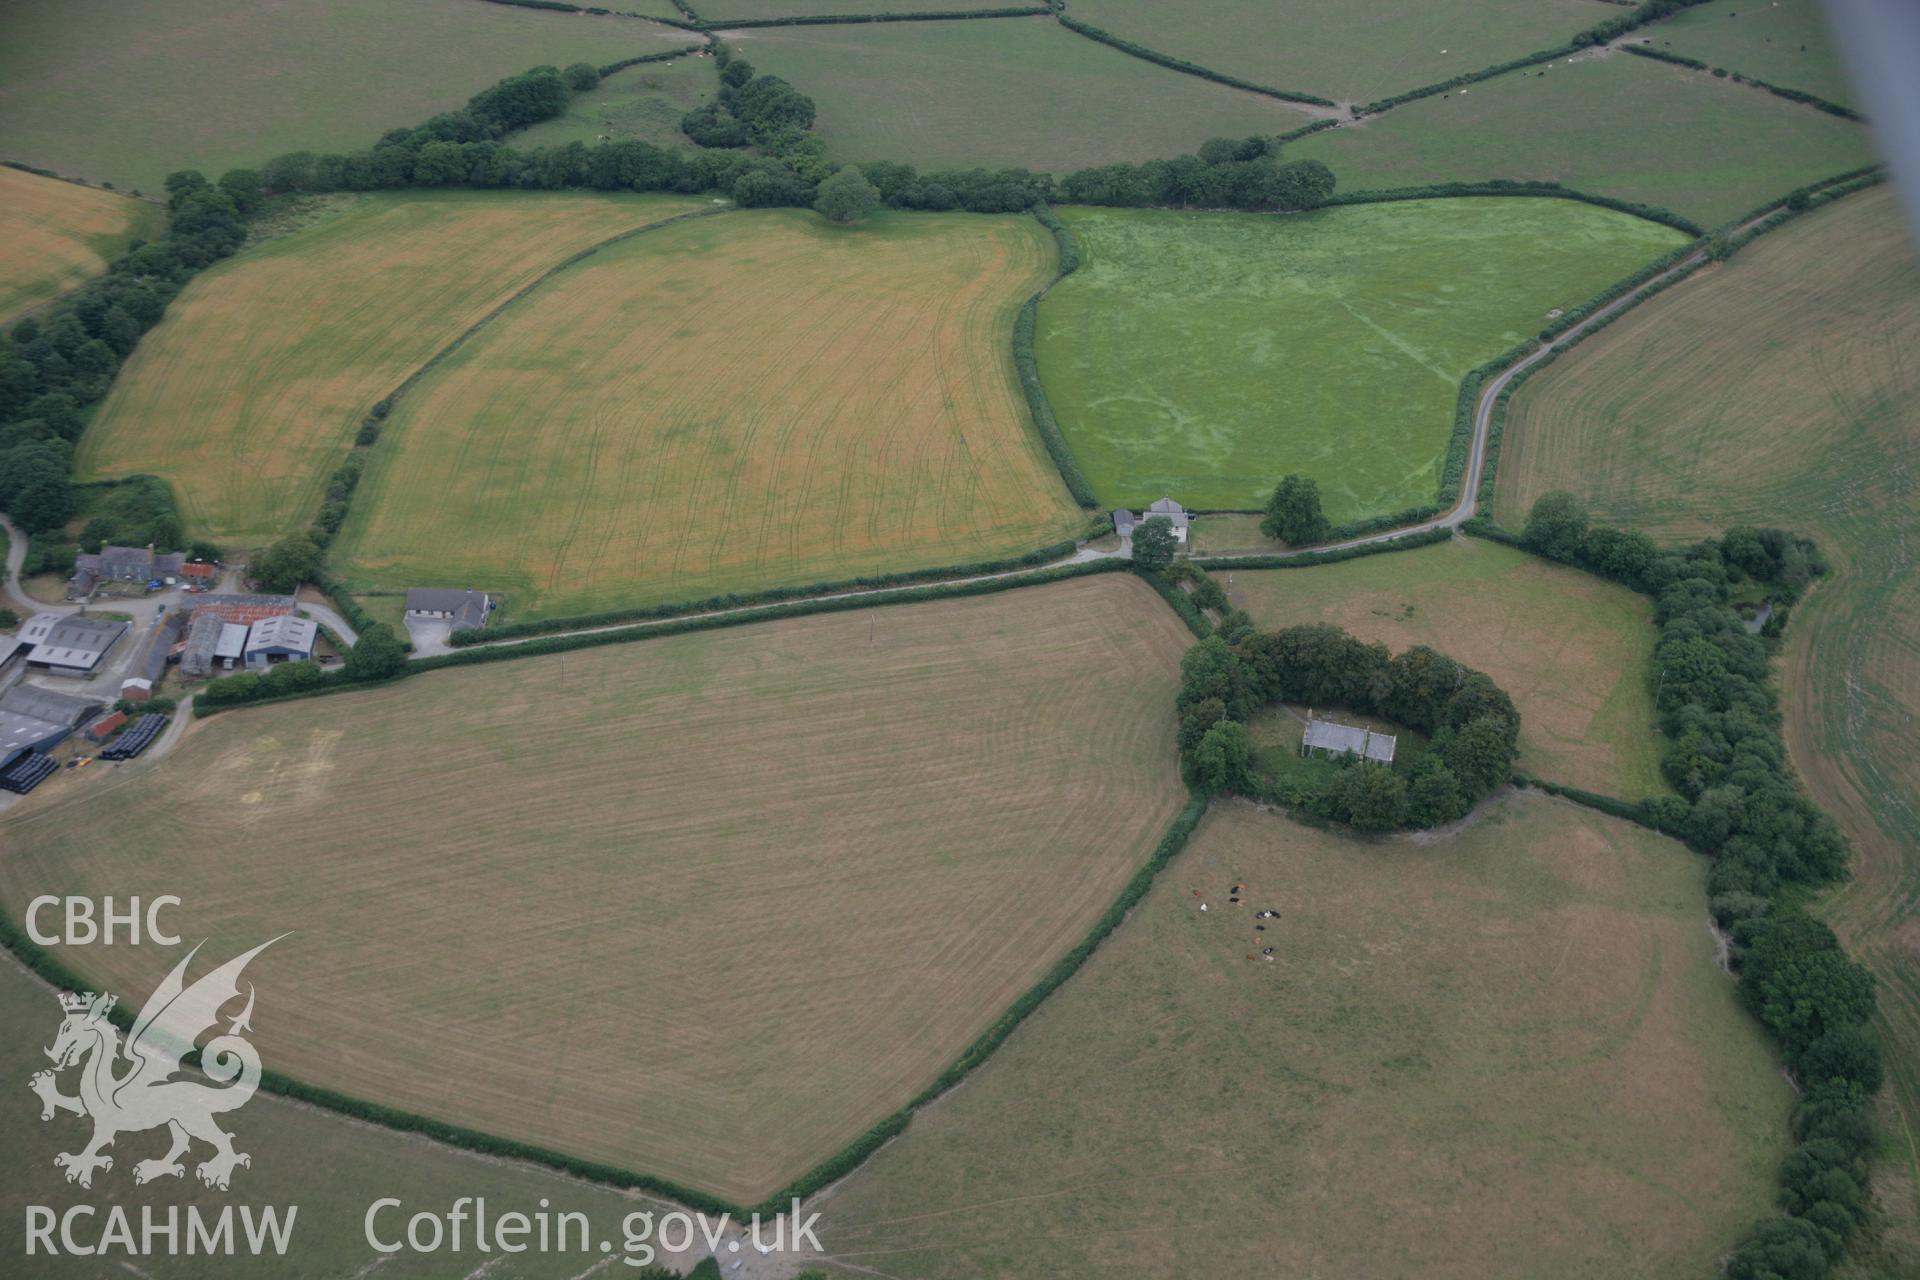 RCAHMW colour oblique aerial photograph of Llangan Church and cropmarks. Taken on 27 July 2006 by Toby Driver.